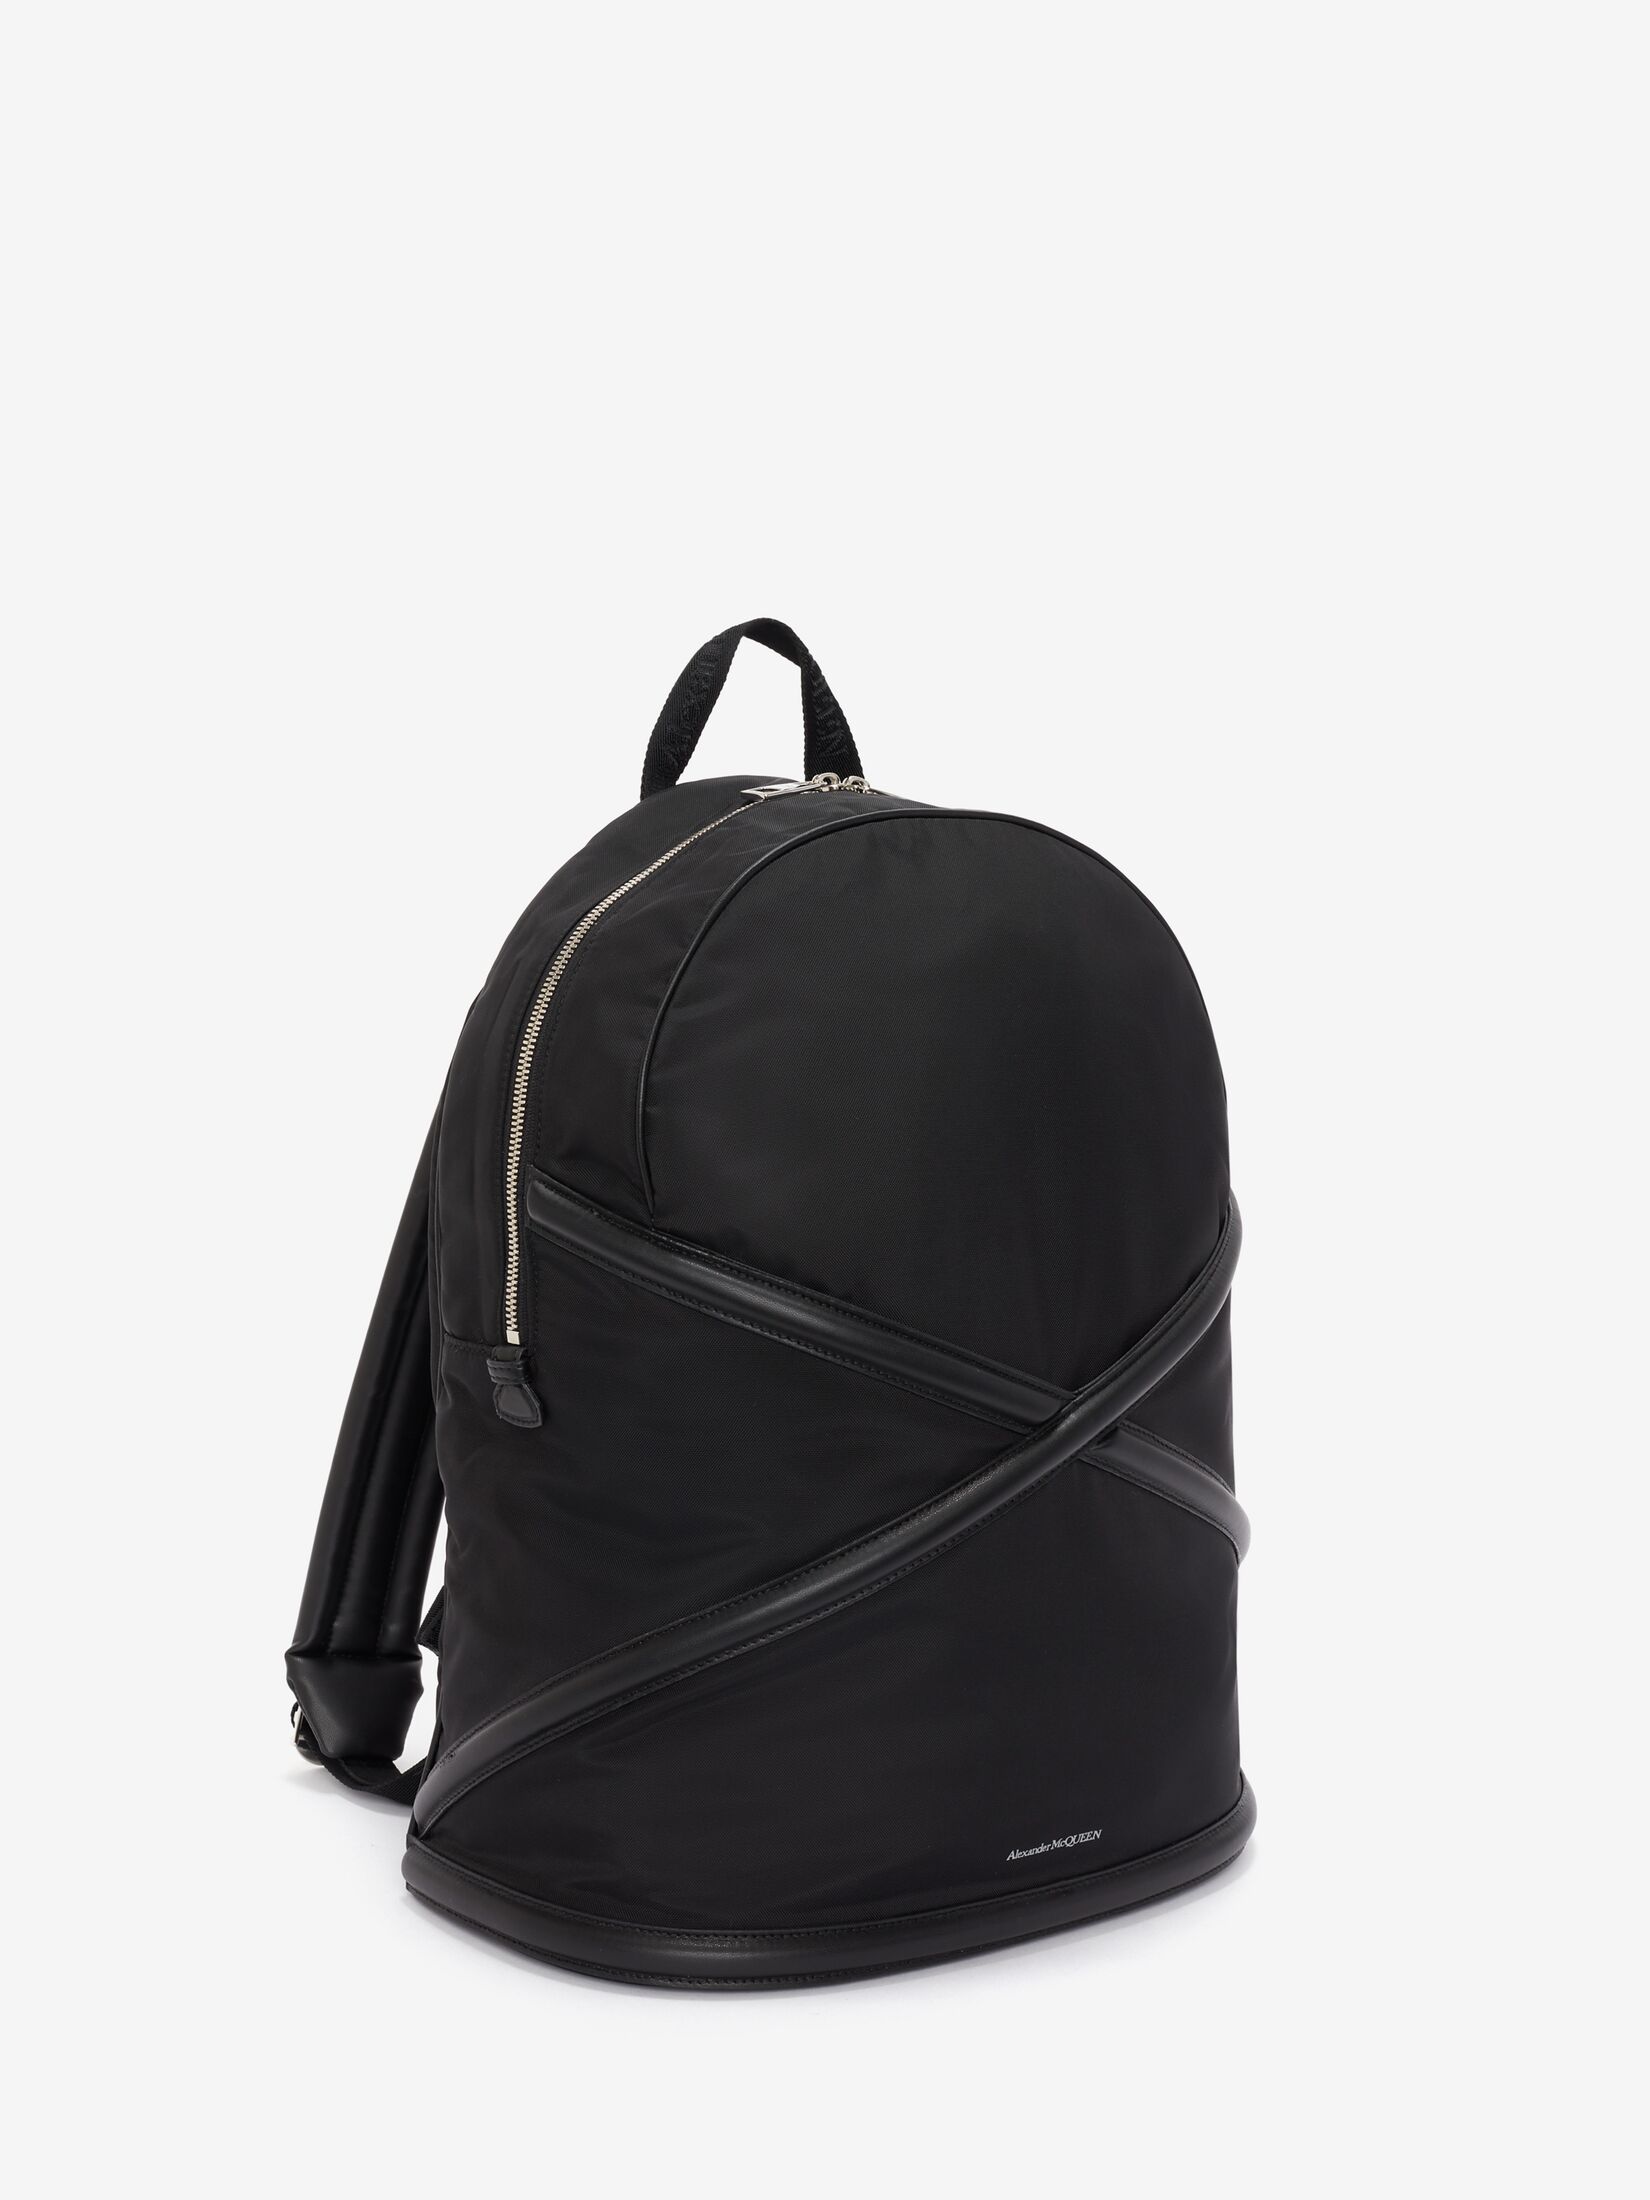 The Harness backpack